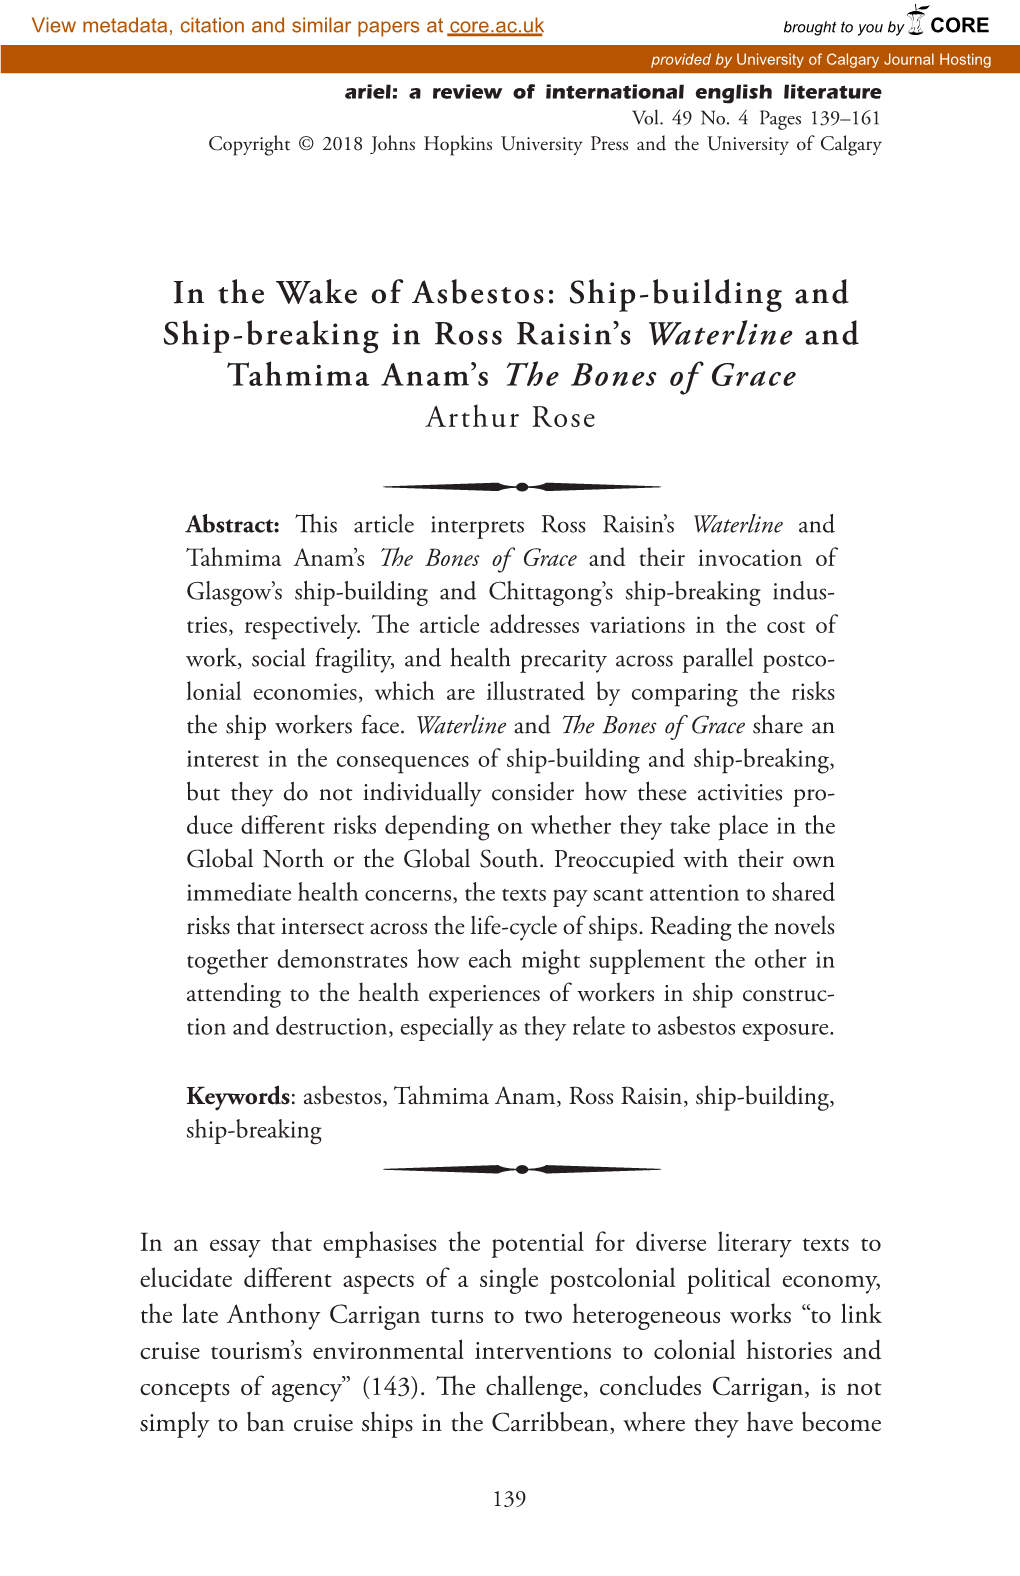 In the Wake of Asbestos: Ship-Building and Ship-Breaking in Ross Raisin’S Waterline and Tahmima Anam’S the Bones of Grace Arthur Rose